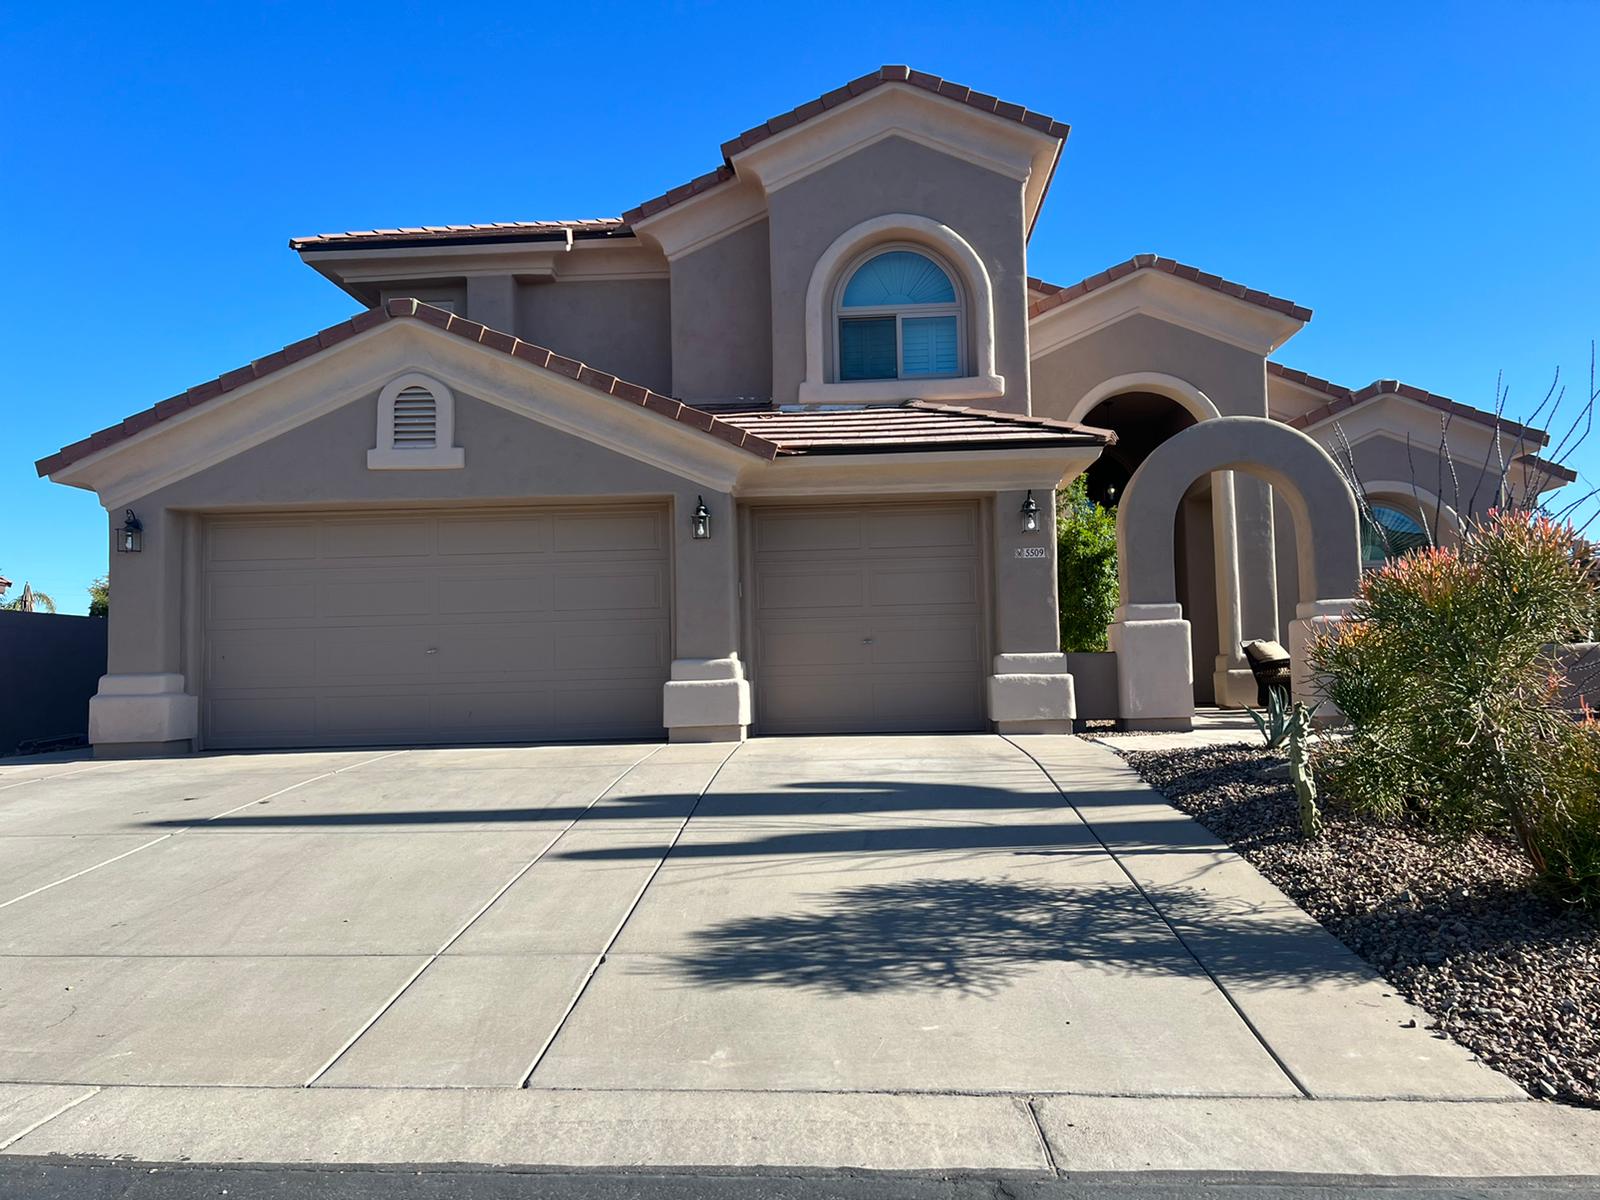 A desert home with a garage, driveway, and new tile roof installation in North Phoenix.